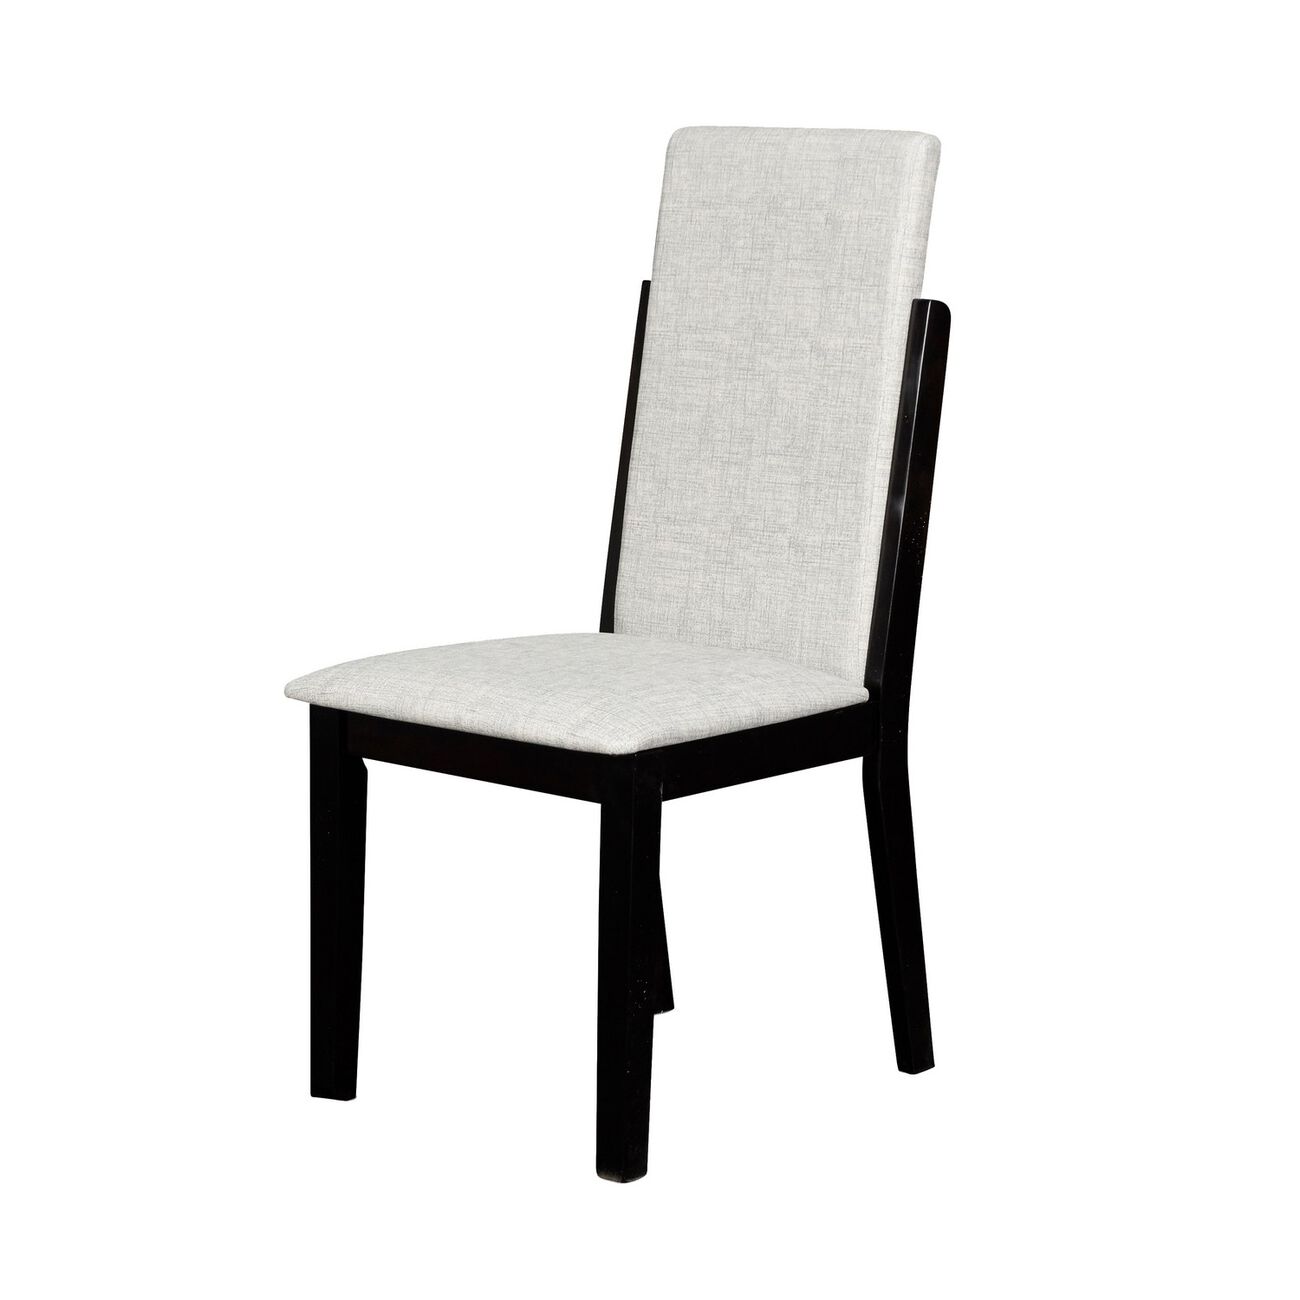 Elongated Back Wooden Dining Chair with Padded Seat, Set of 2, Gray